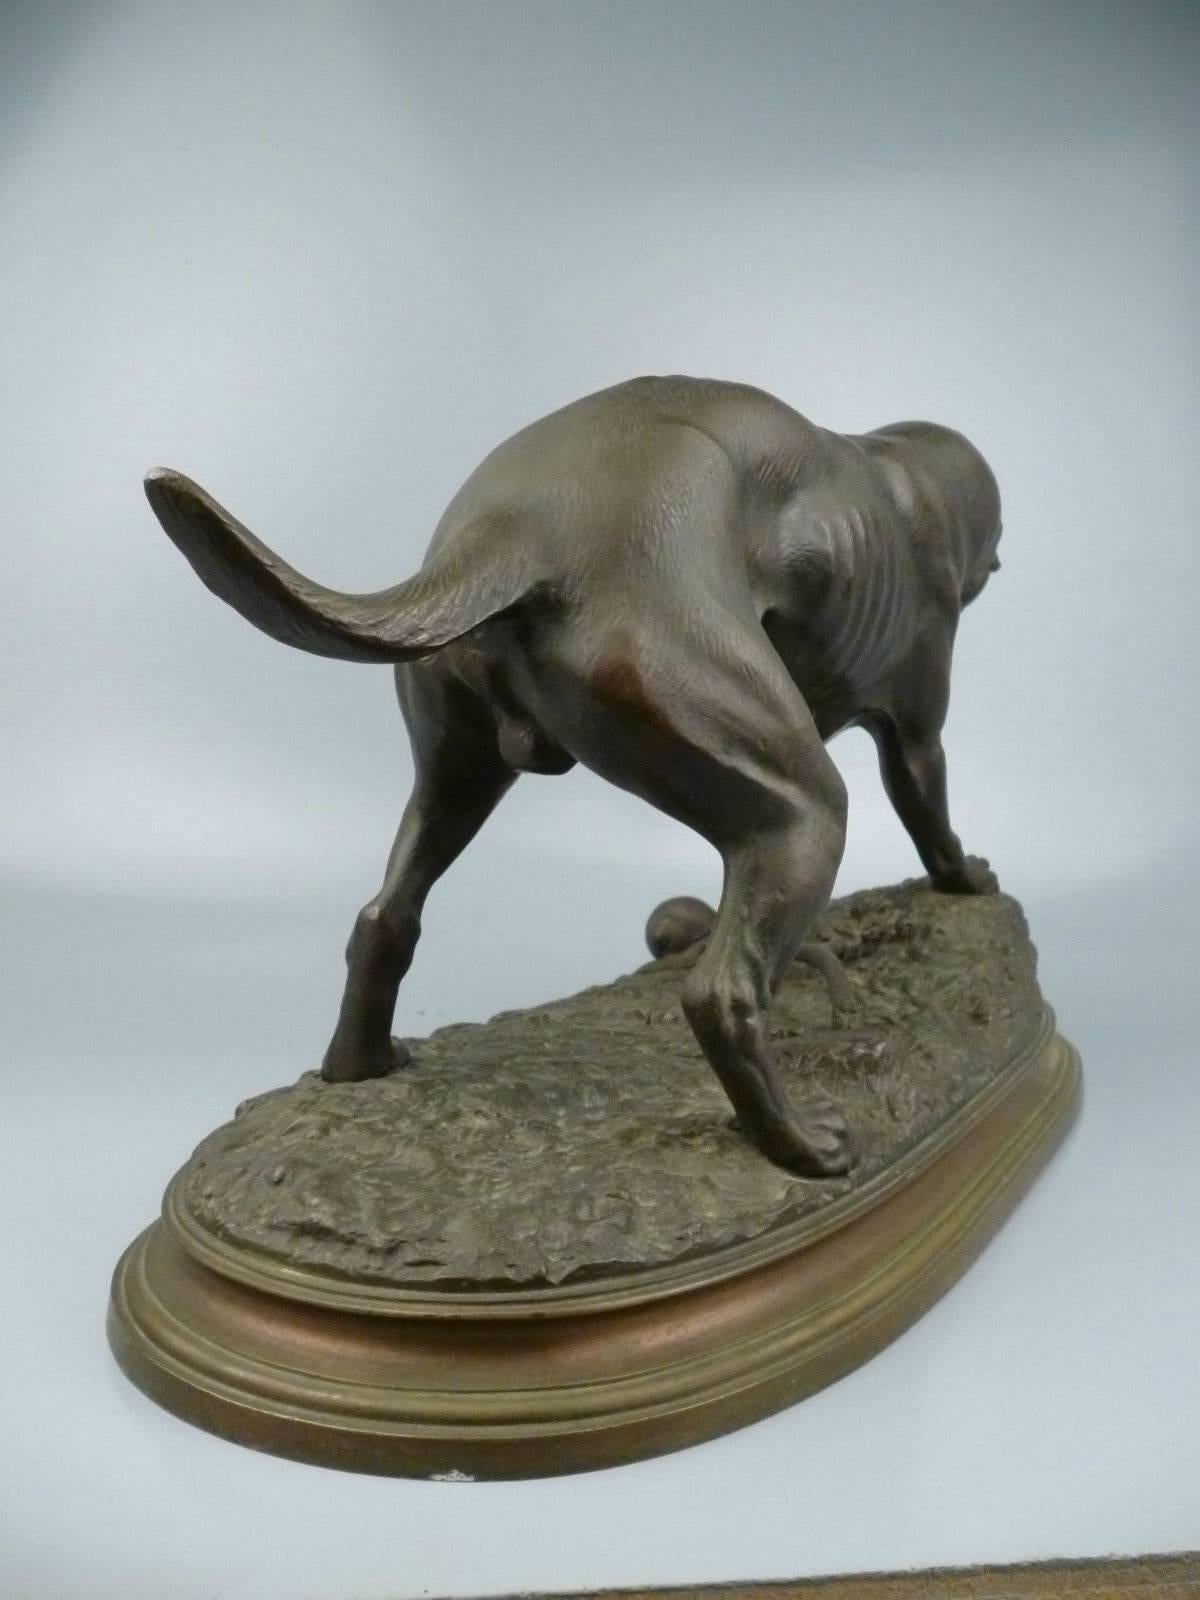 Cast Bronze Sculpture of a Jack Russell Terrier Dog and Snail by F. F. Steenackers